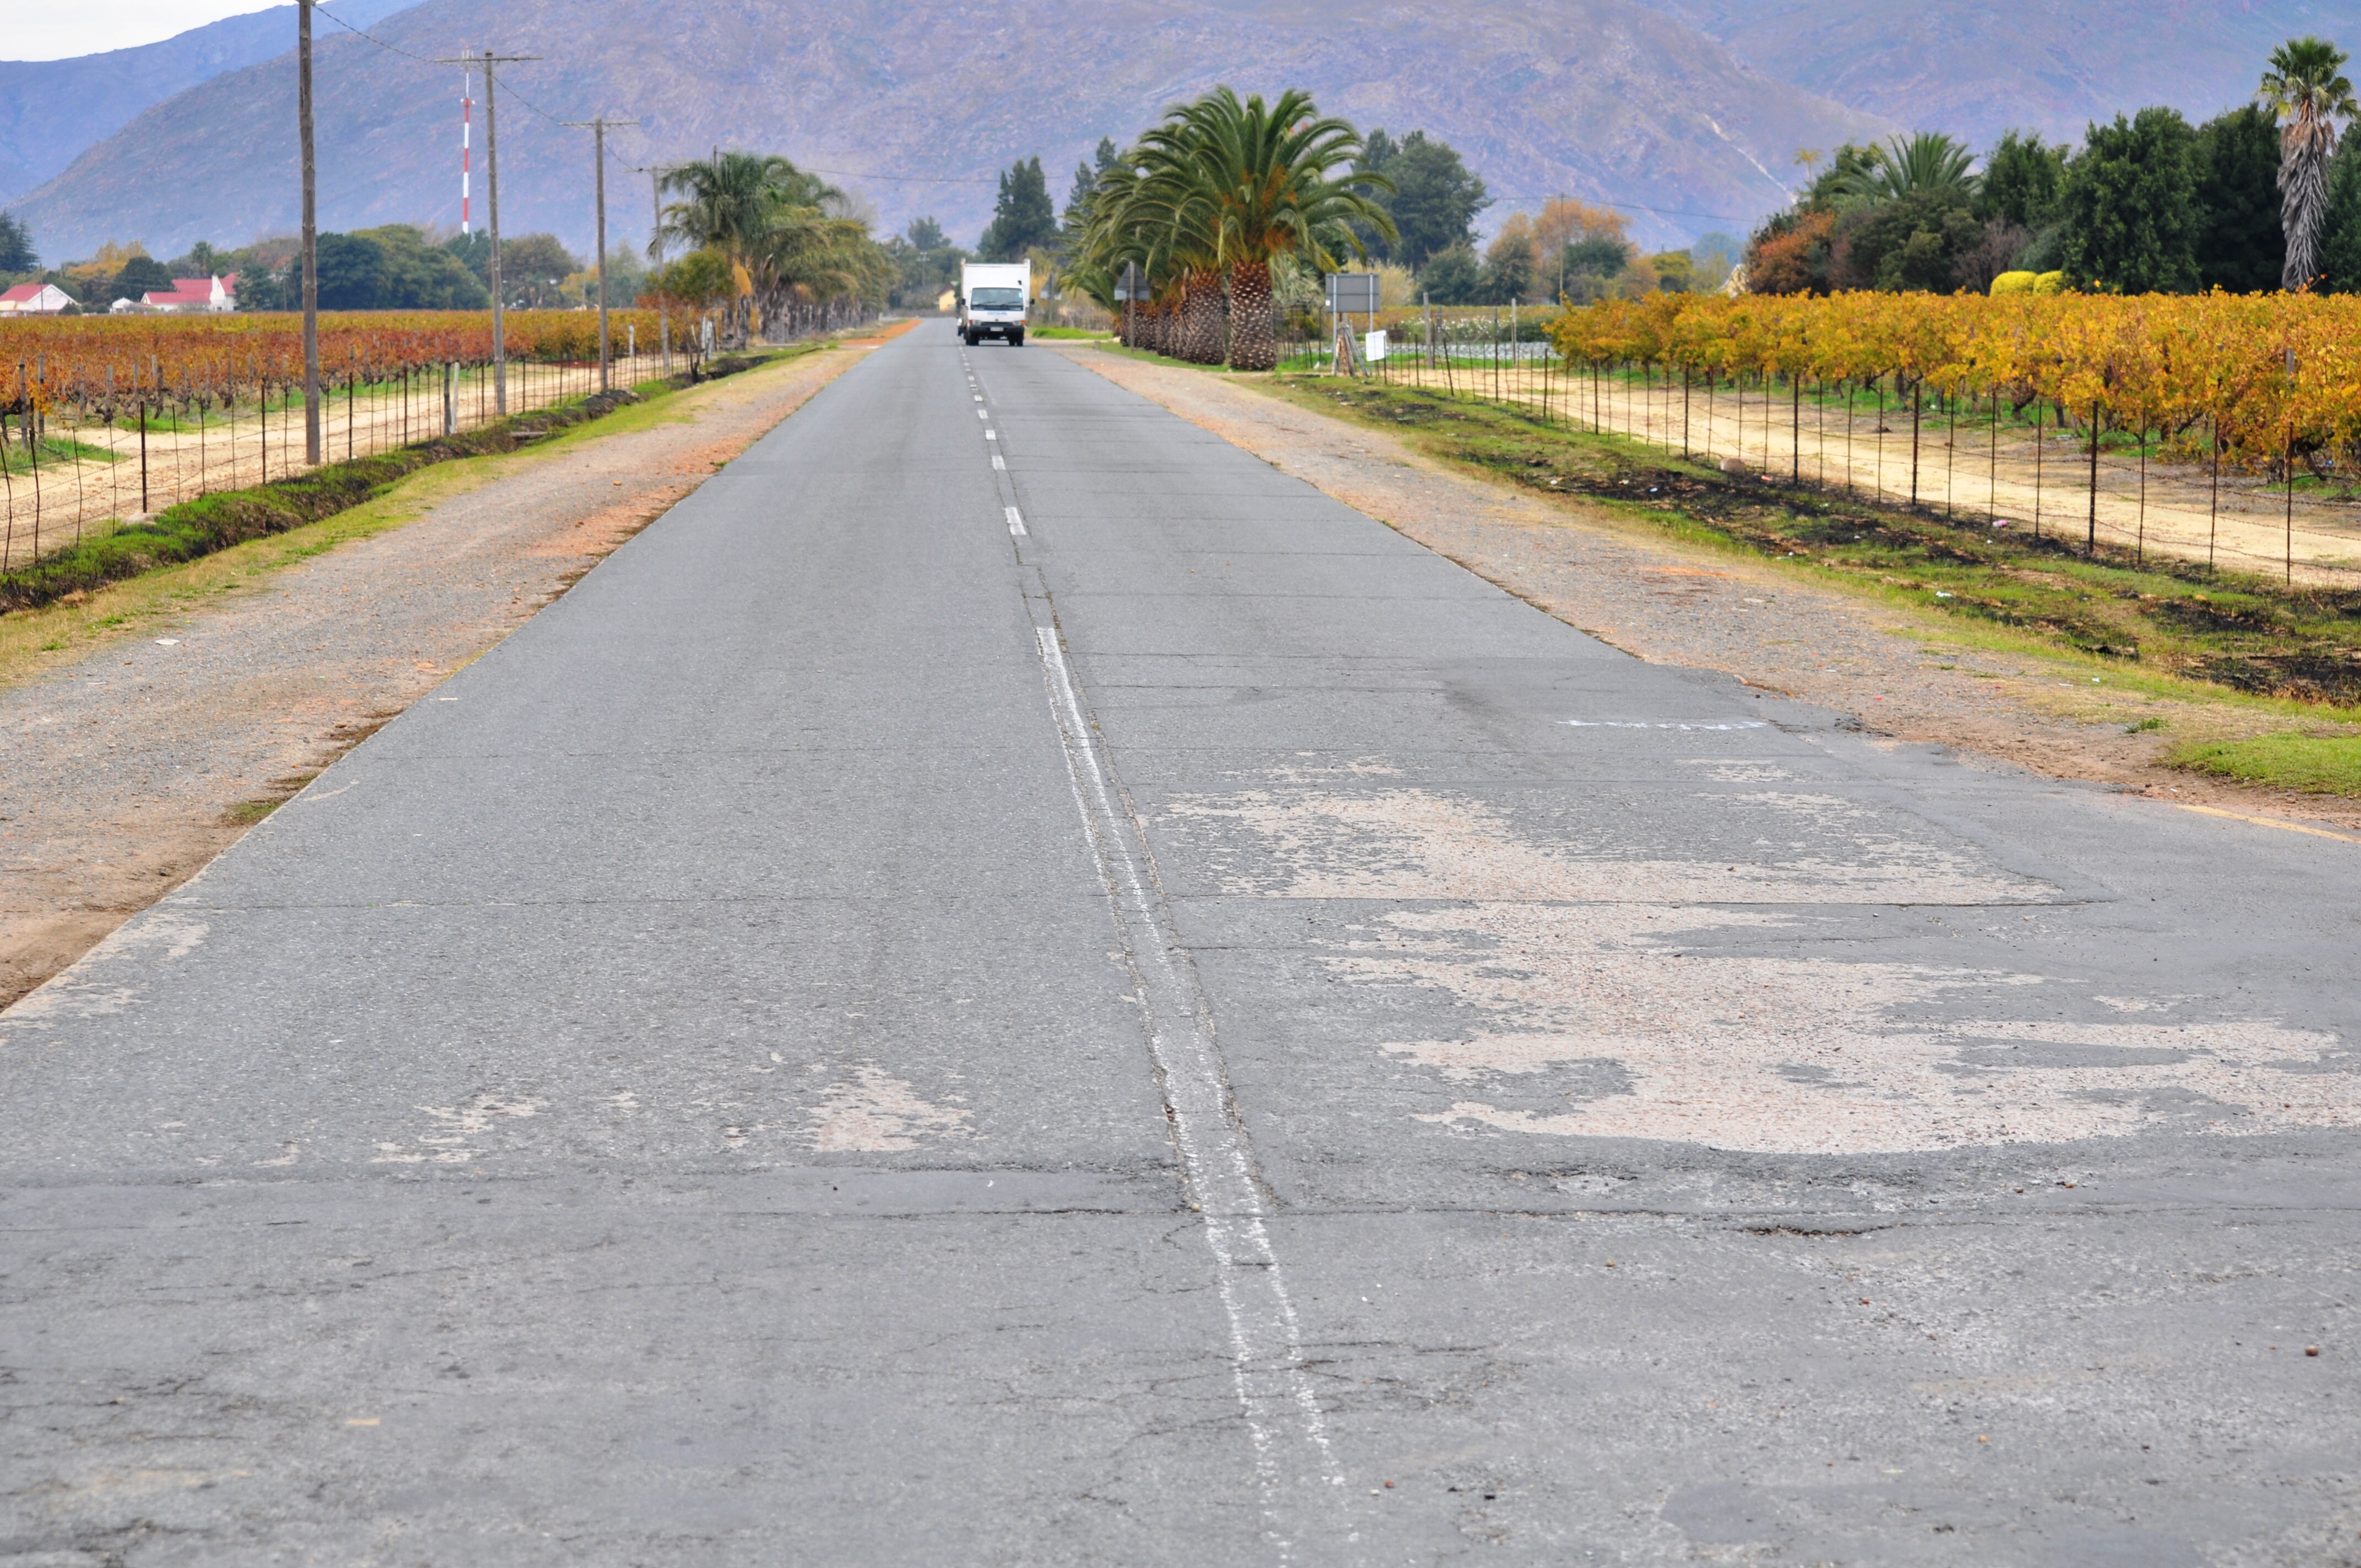 The current condition of the R43 between Worcester and Rawsonville.